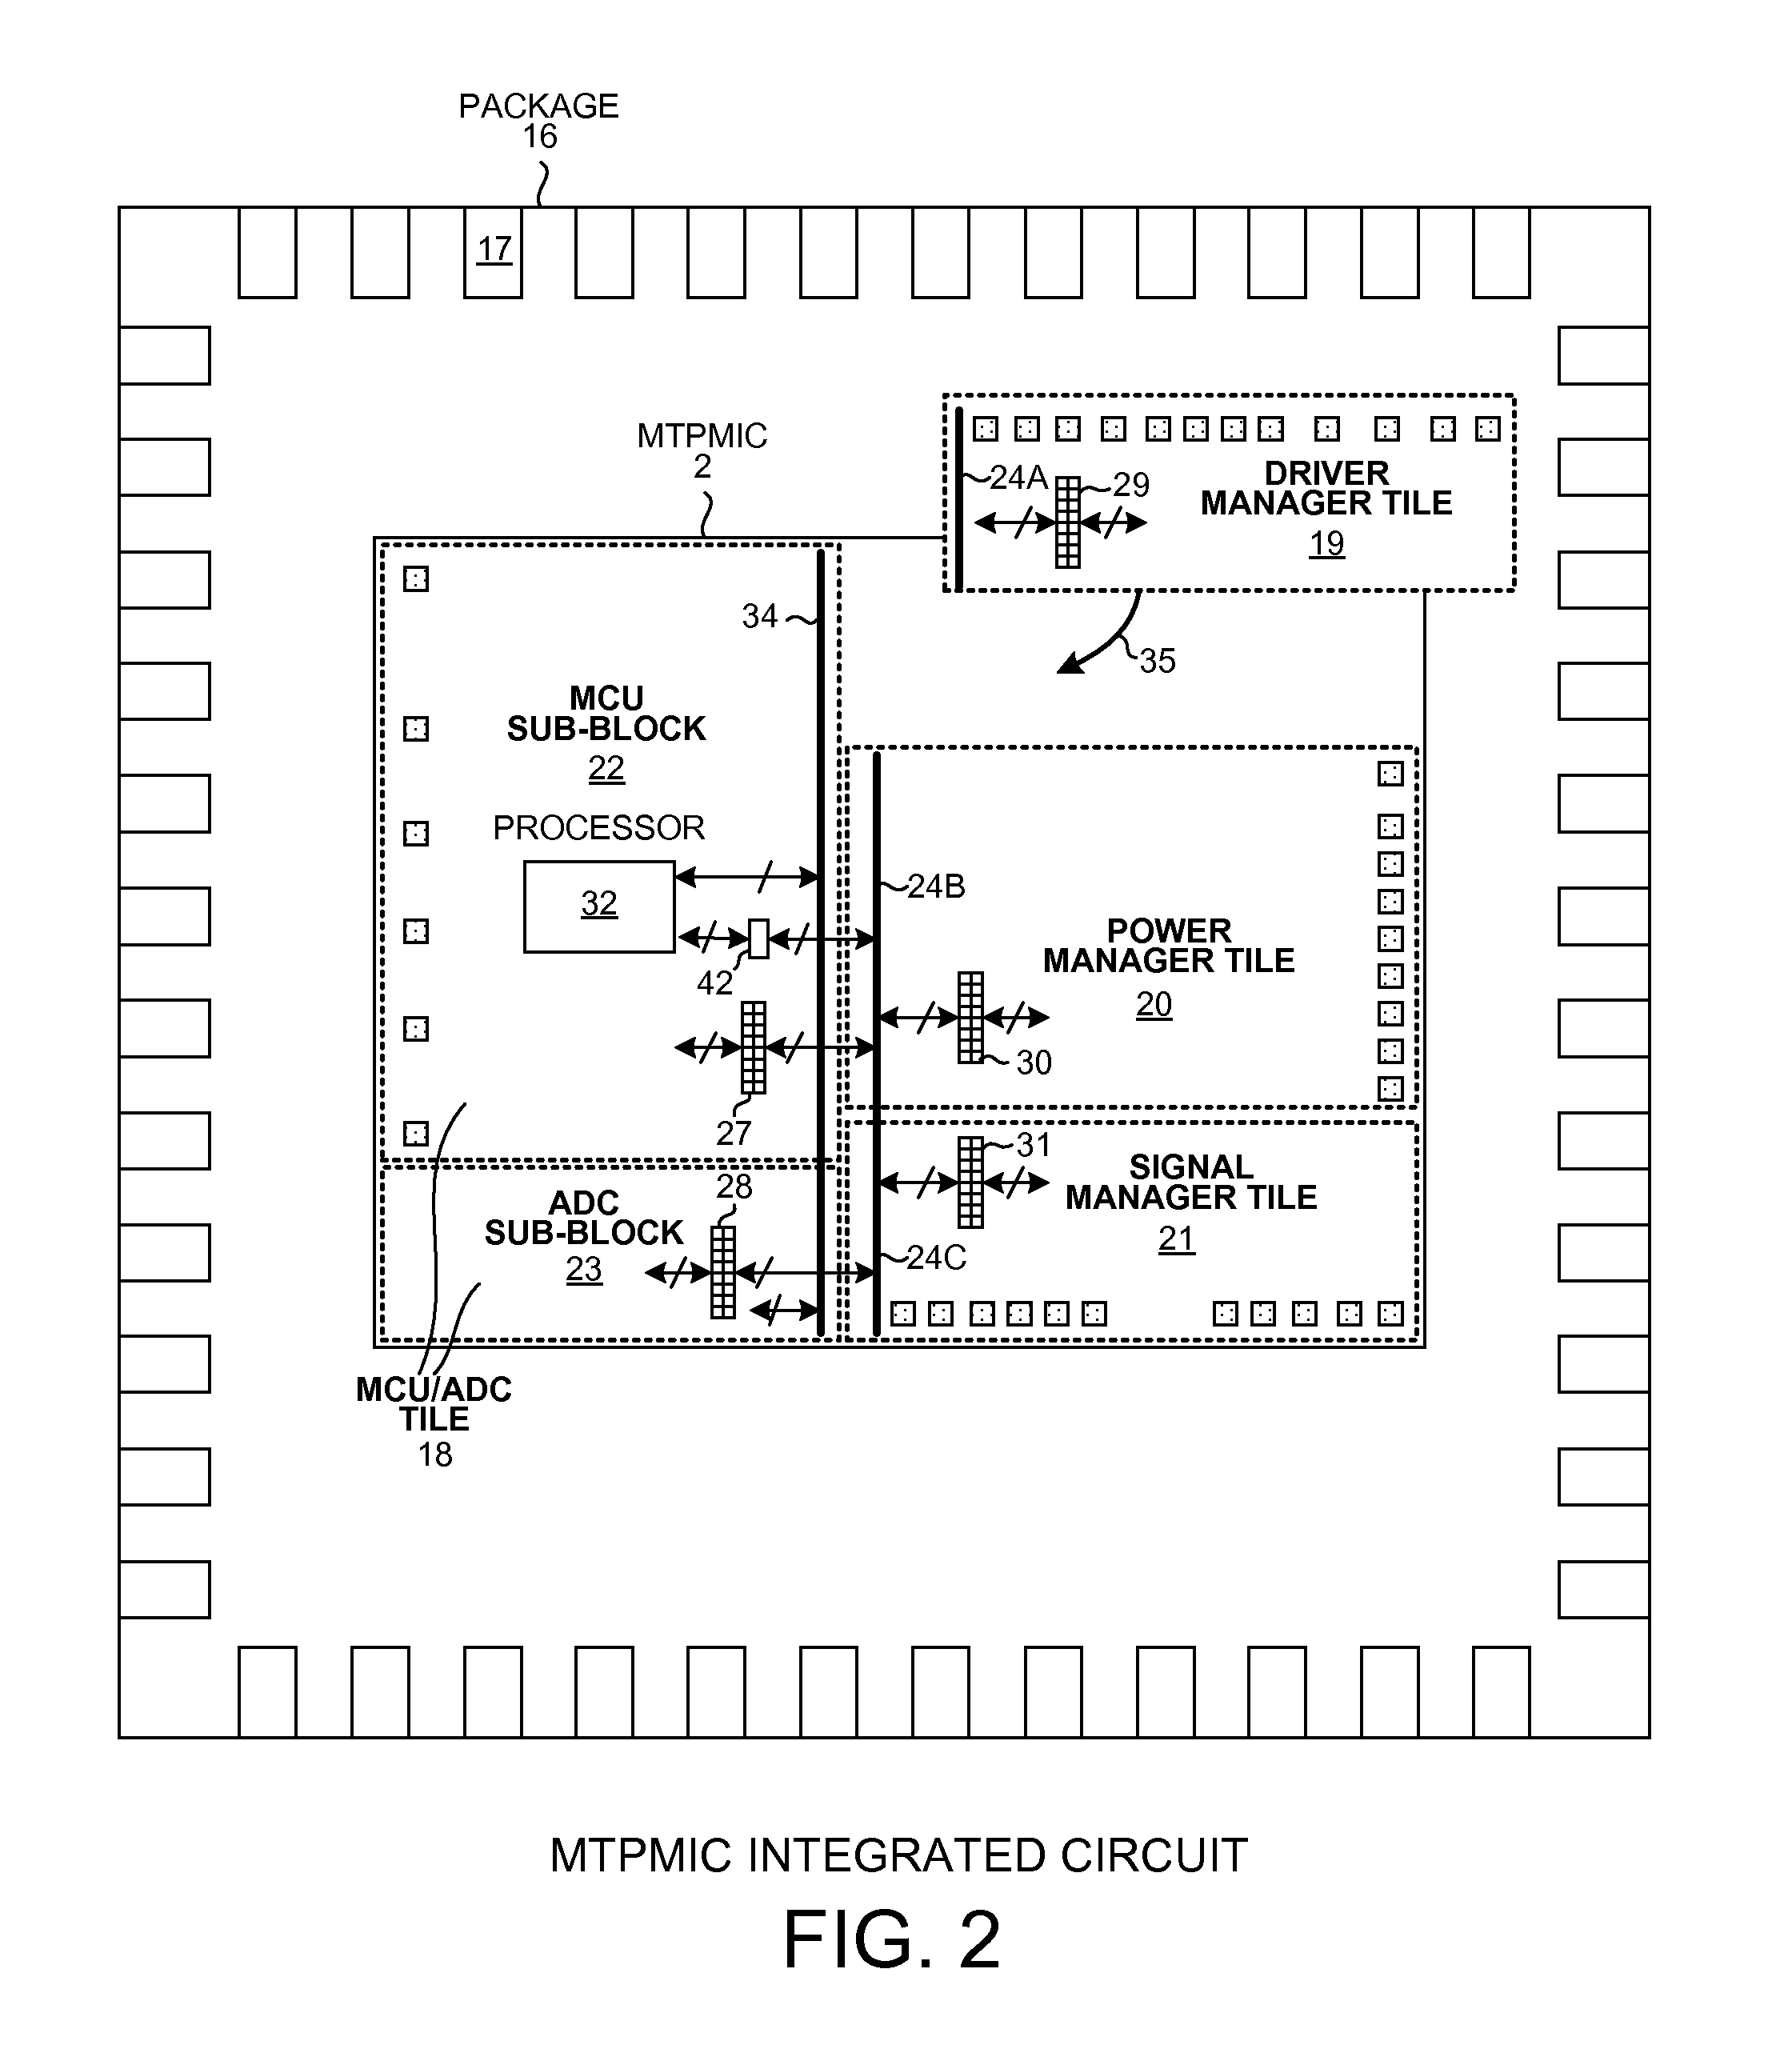 Multi-Mode Power Manager For Power Management Integrated Circuit